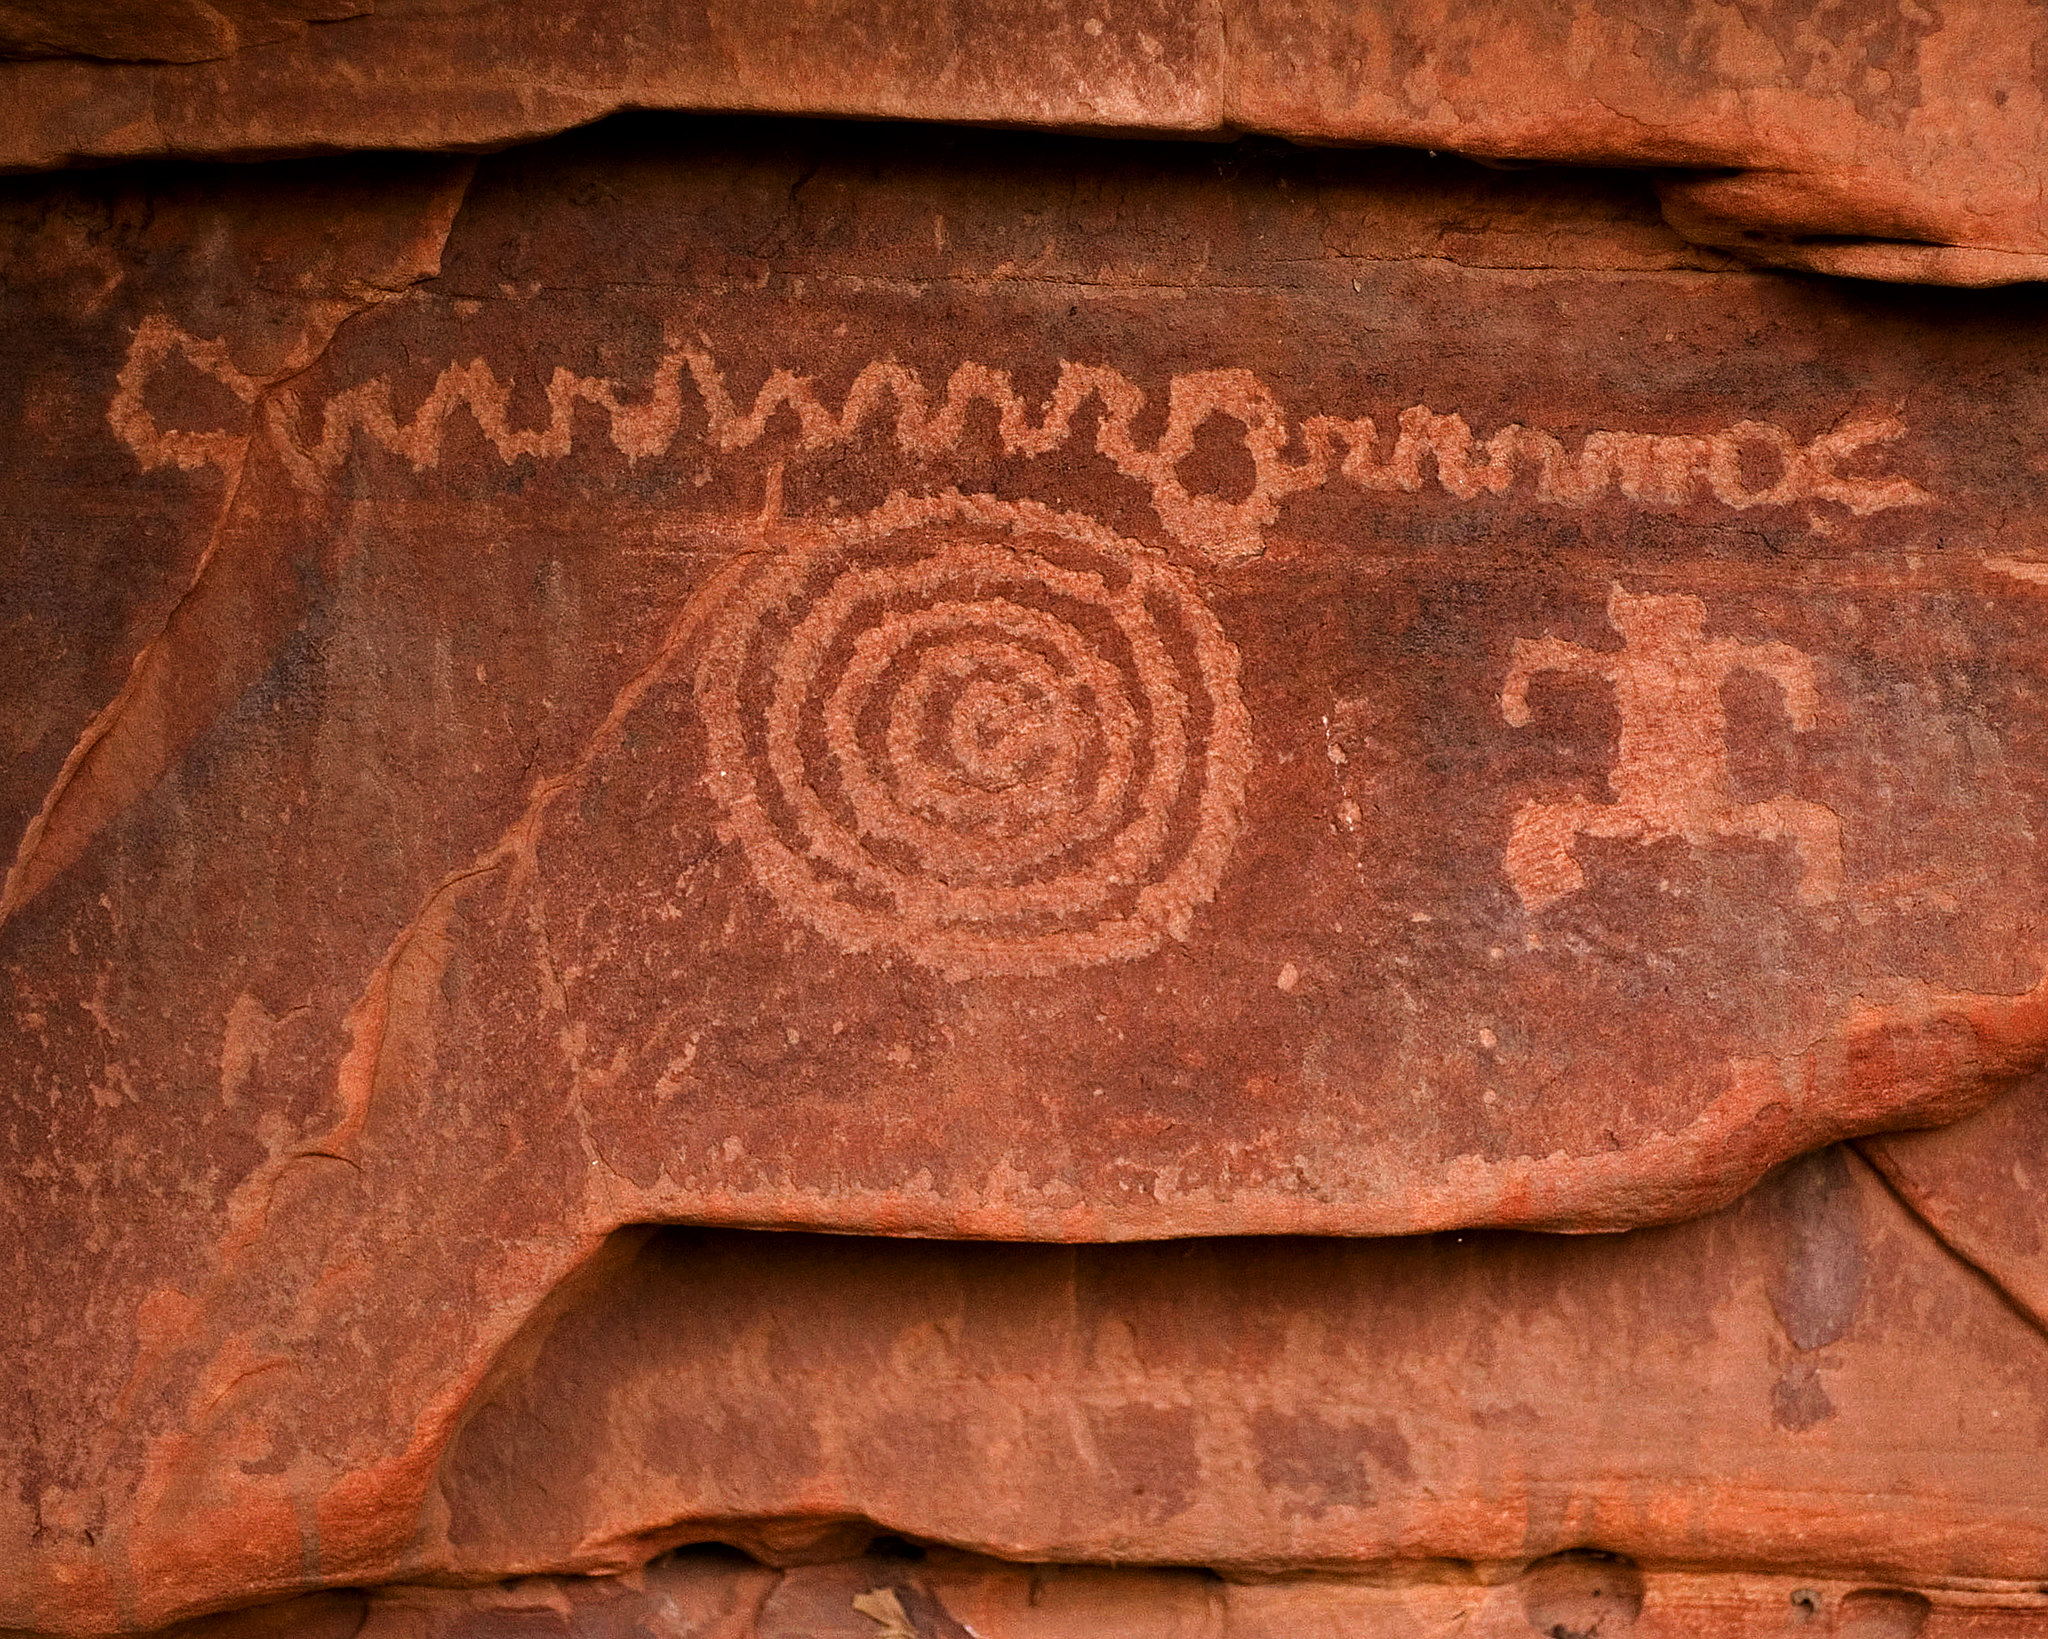 A rock art panel with a squiggly line, a human figure, and a spiral